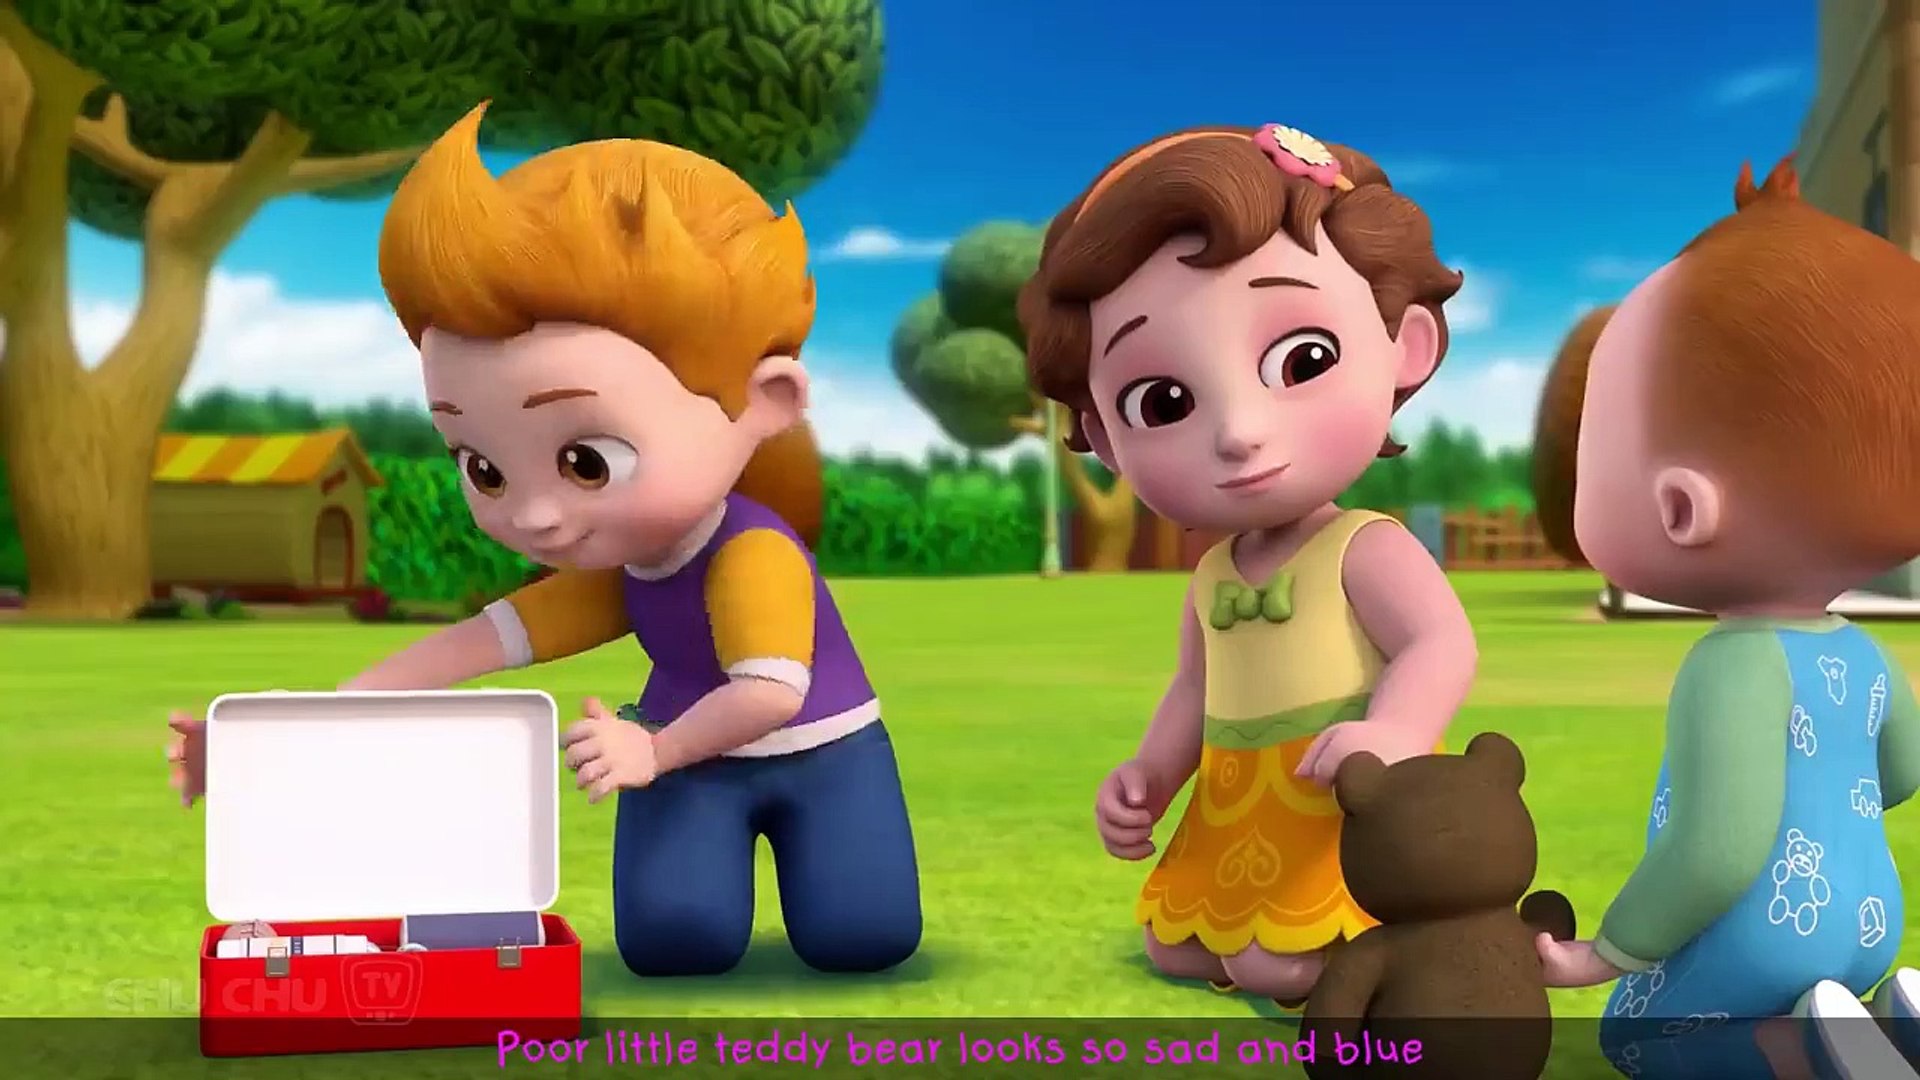 The Boo Boo Song 2 with Toys - ChuChu TV Nursery Rhymes & Kids Songs -  video Dailymotion